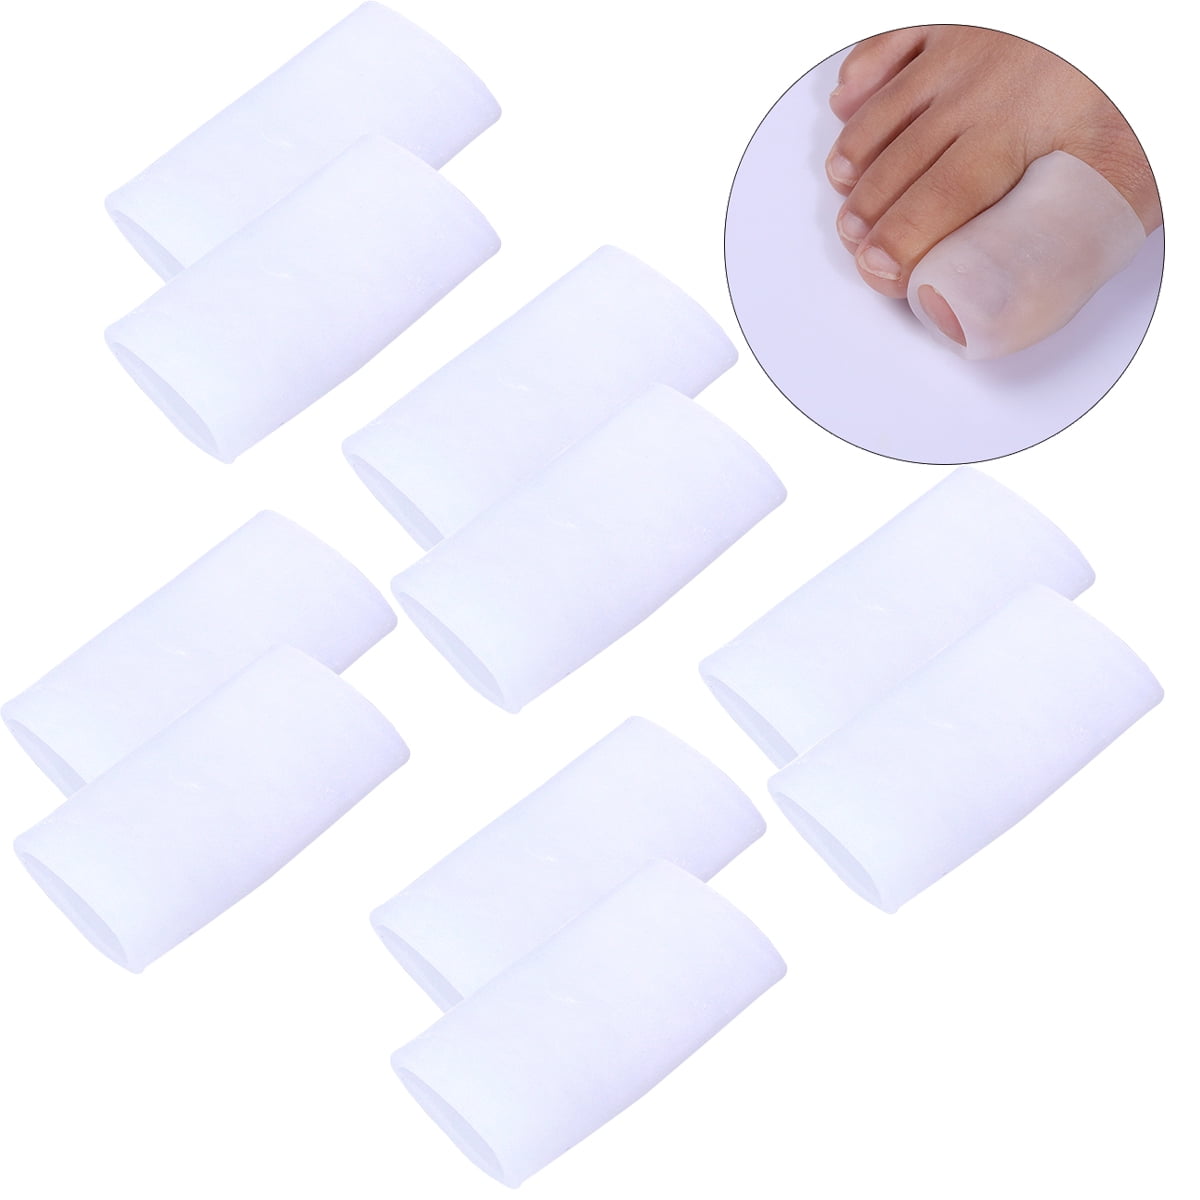 1 Pairs Gel Silicone Soft Toe Cap Protector Cover for Blisters Pain Relief Case 